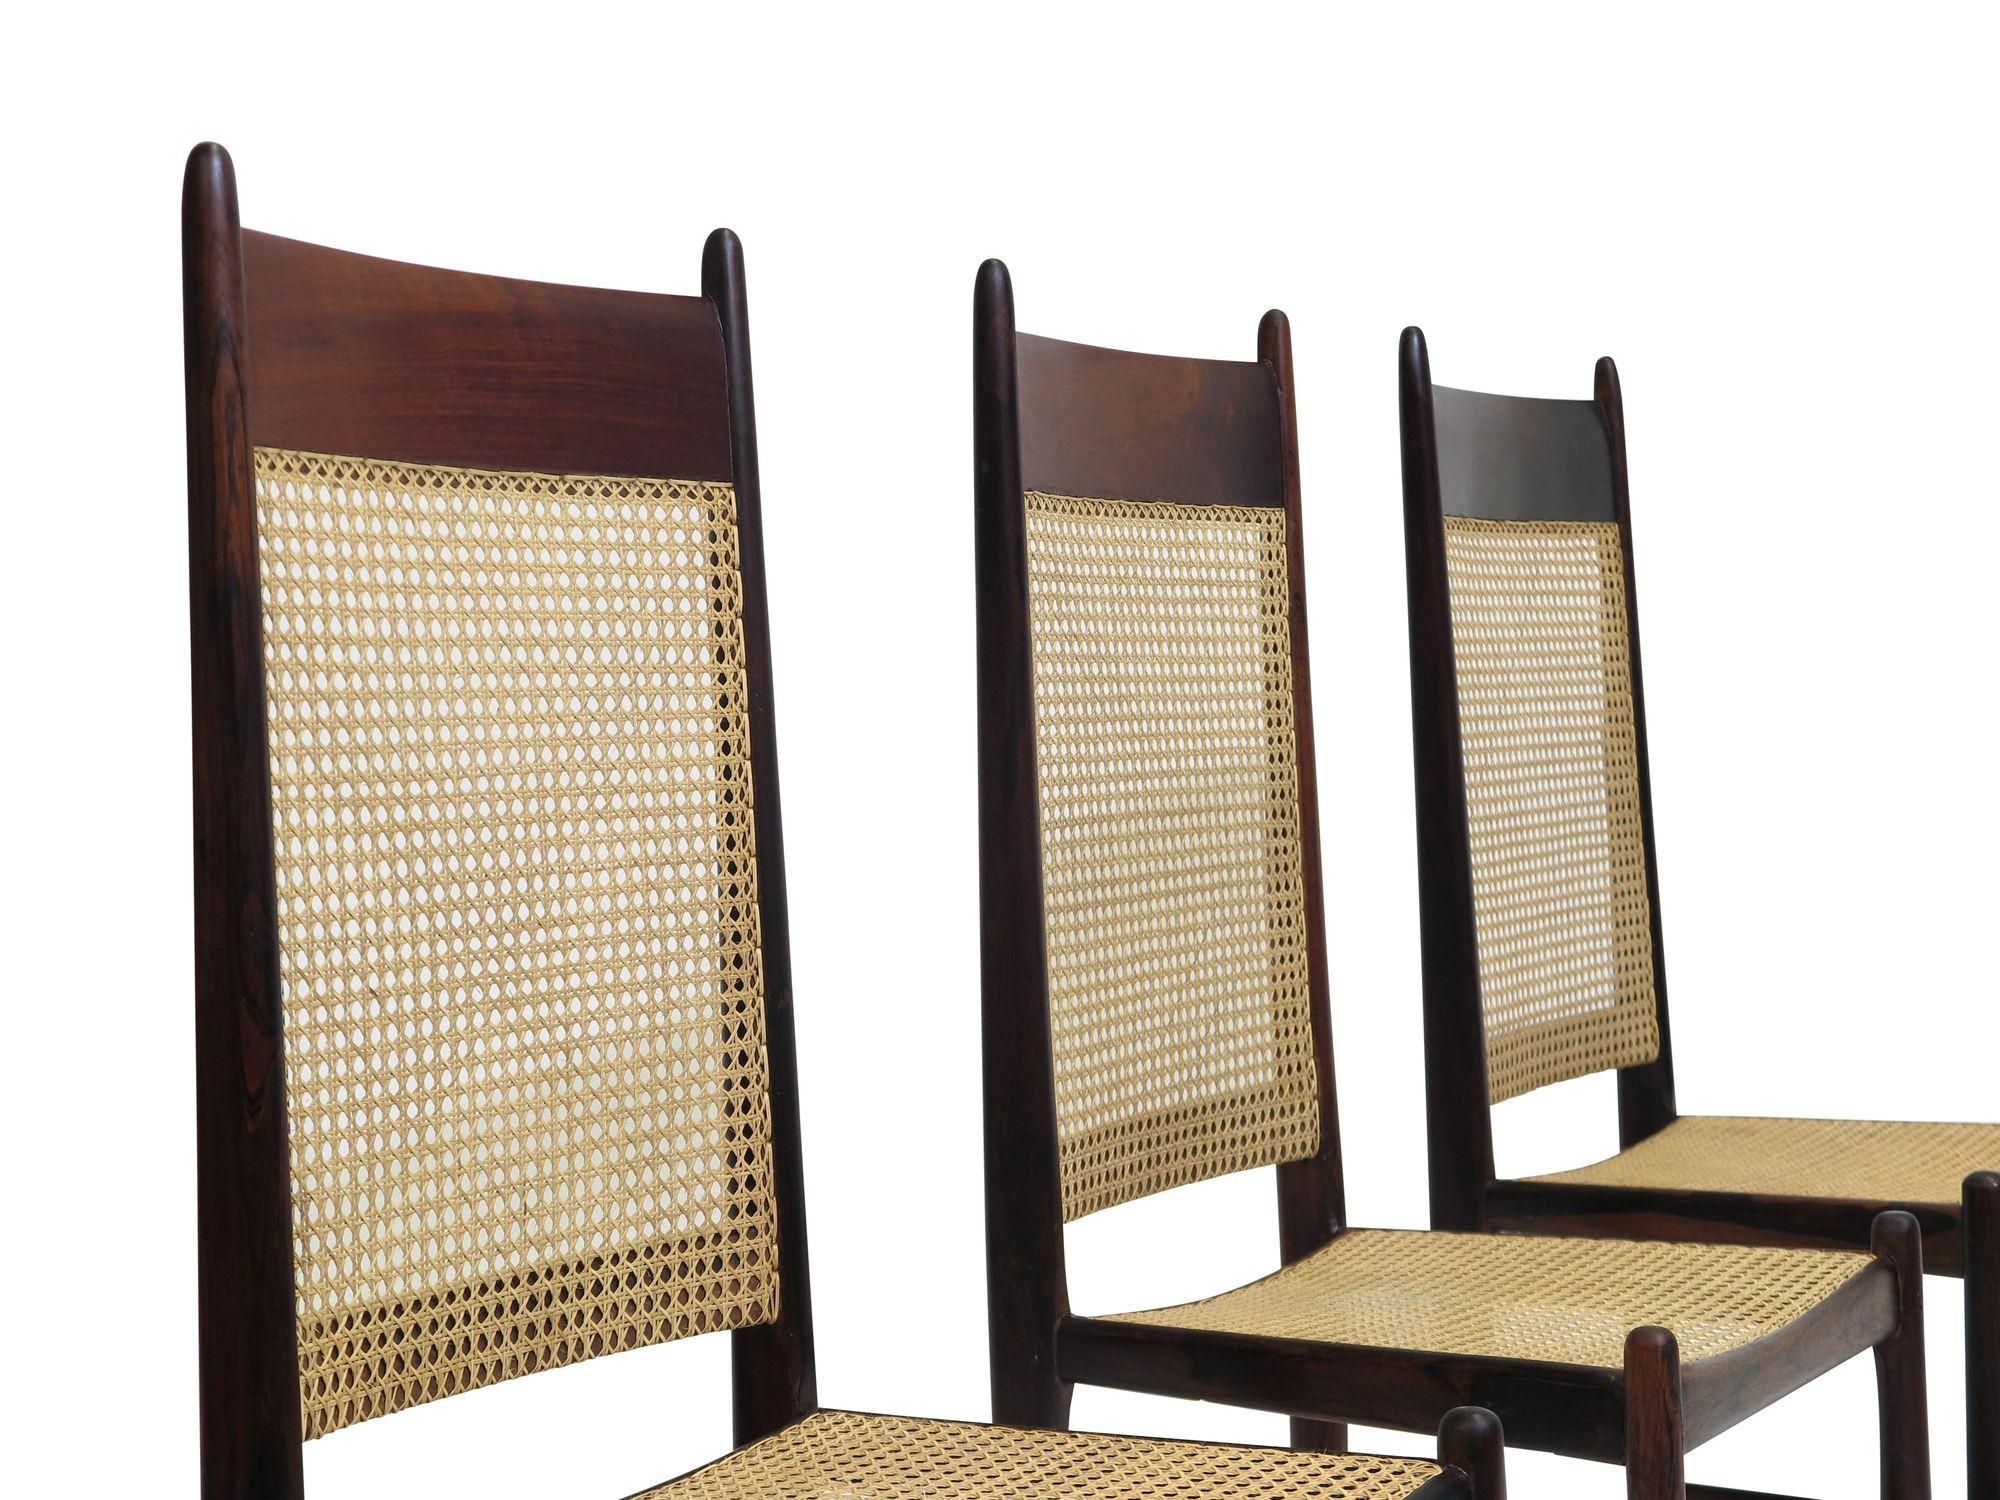 Midcentury Brazilian rosewood dining chairs attributed to Sergio Rodrigues, circa 1960 Brazil. Chairs are crafted of solid Brazilian rosewood with handwoven cane backs and seats. The cane has been rewoven and in excellent condition. Can be sold